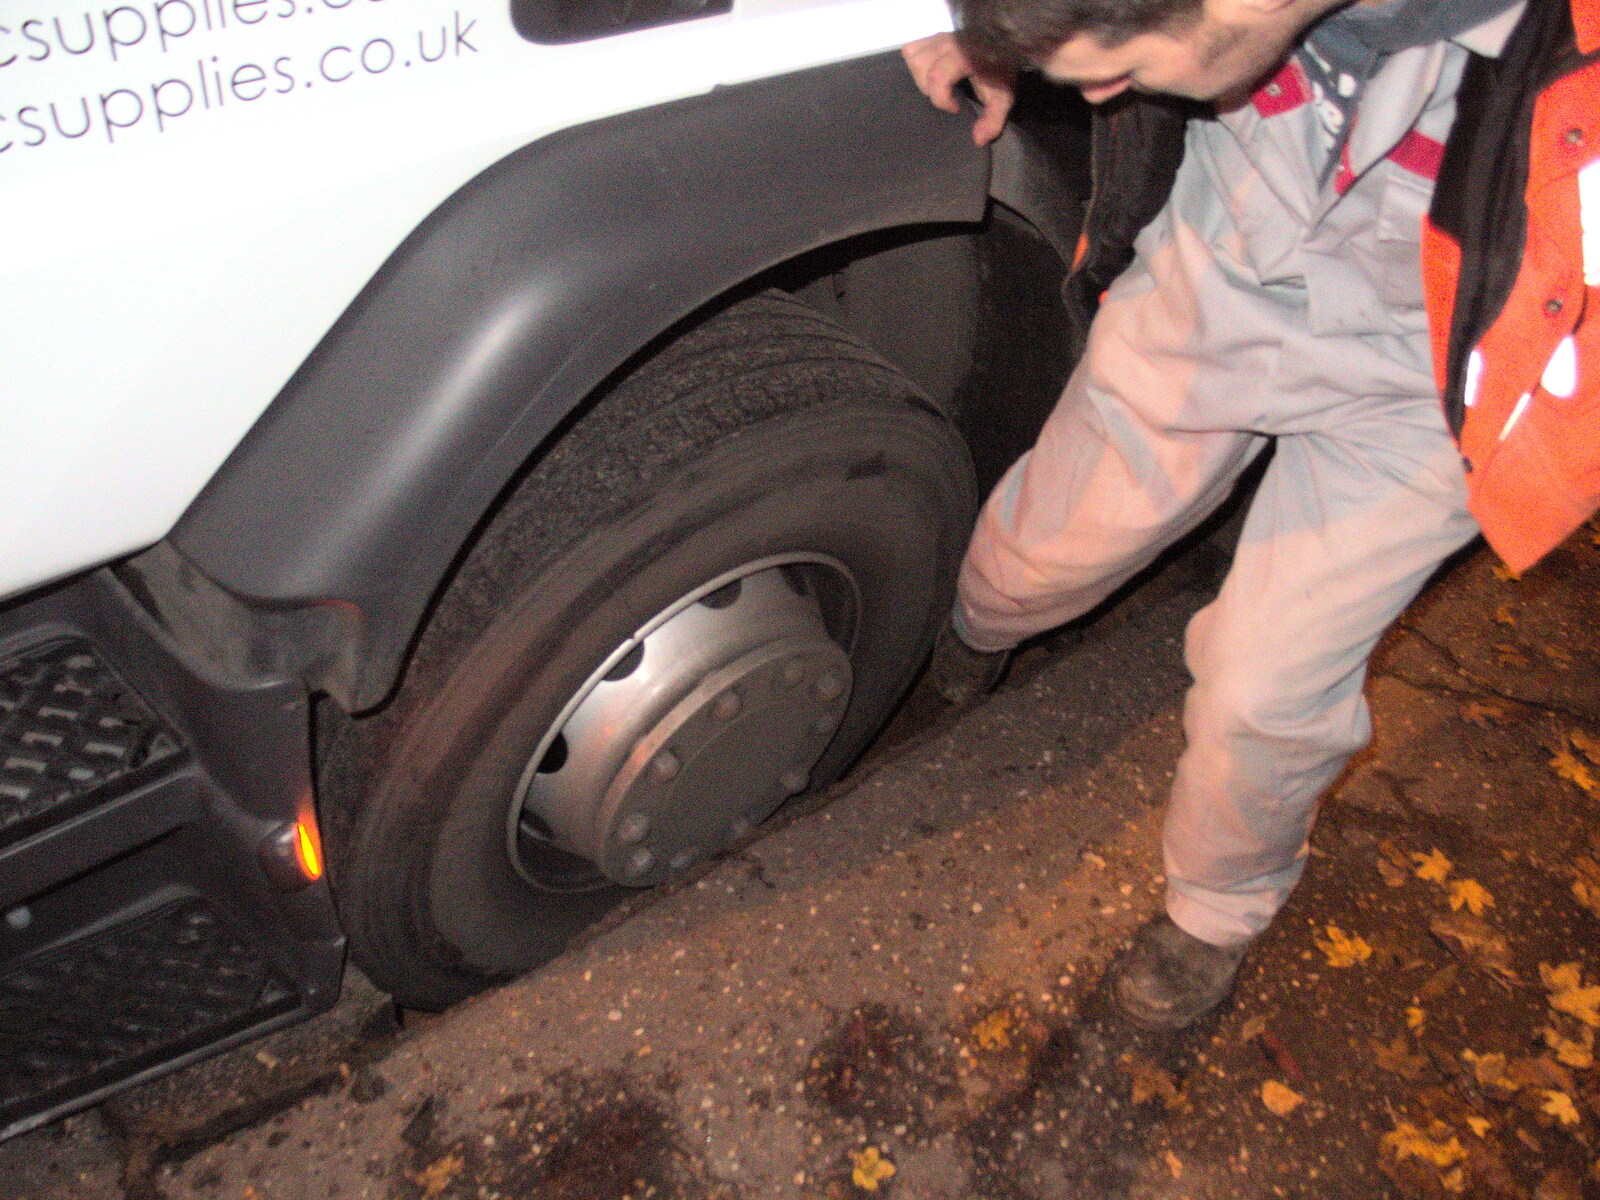 The Humphries tow-truck driver checks the hole out from The Lorry-Eating Pavement of Diss, Norfolk - 3rd December